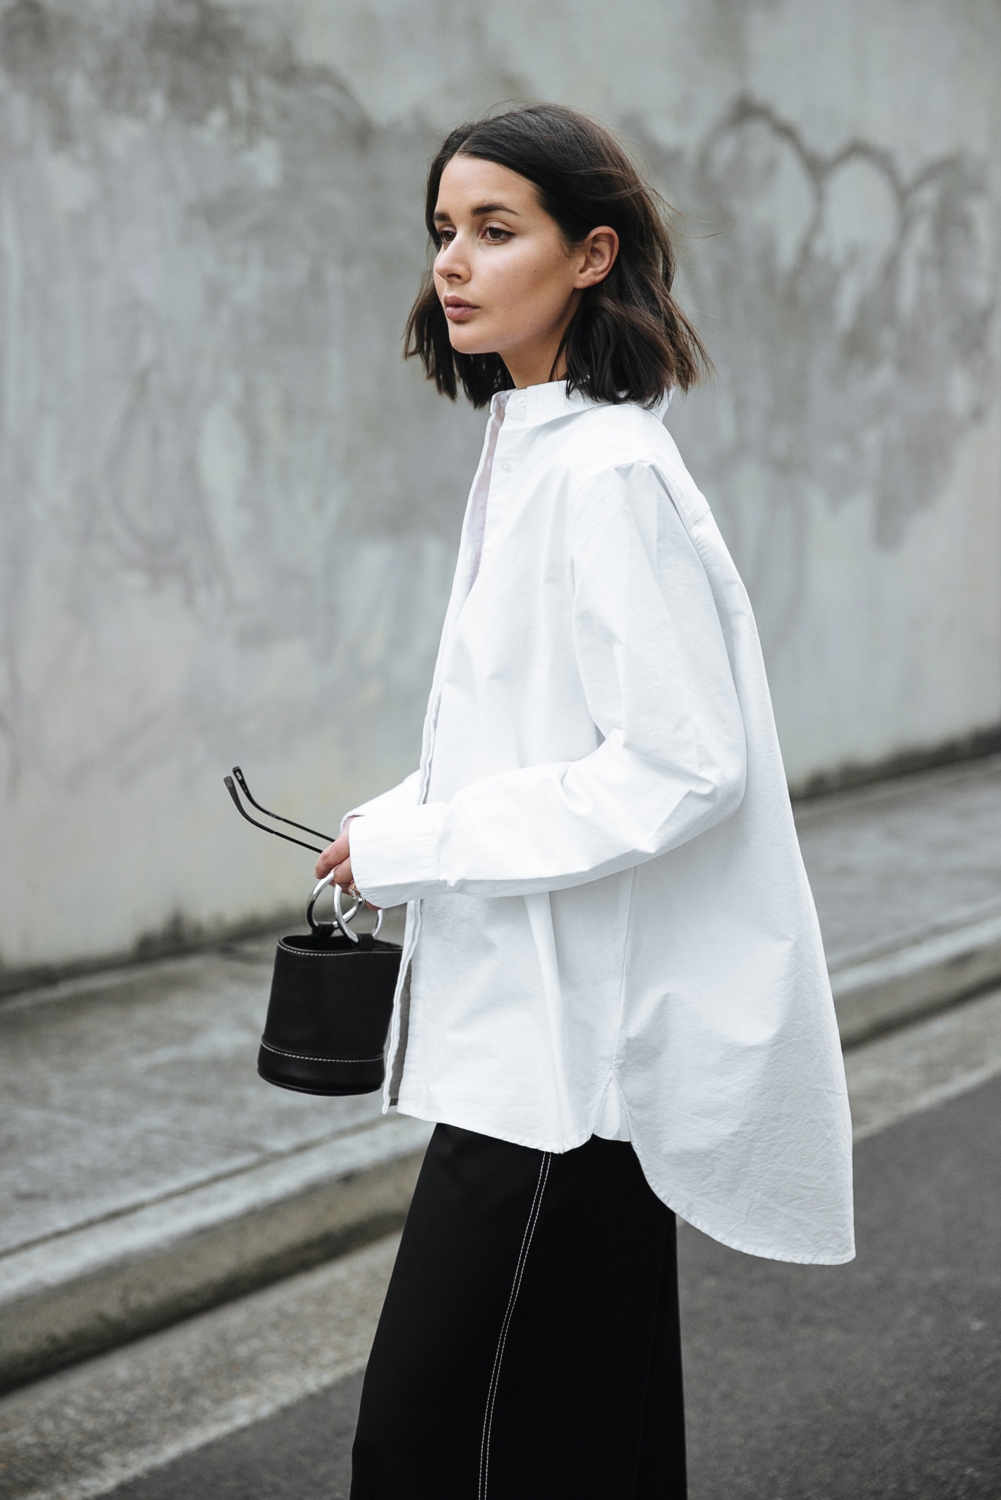 Just, Relax | Oversized clothing | Black and white outfit | Style | Outfit | HarperandHarley